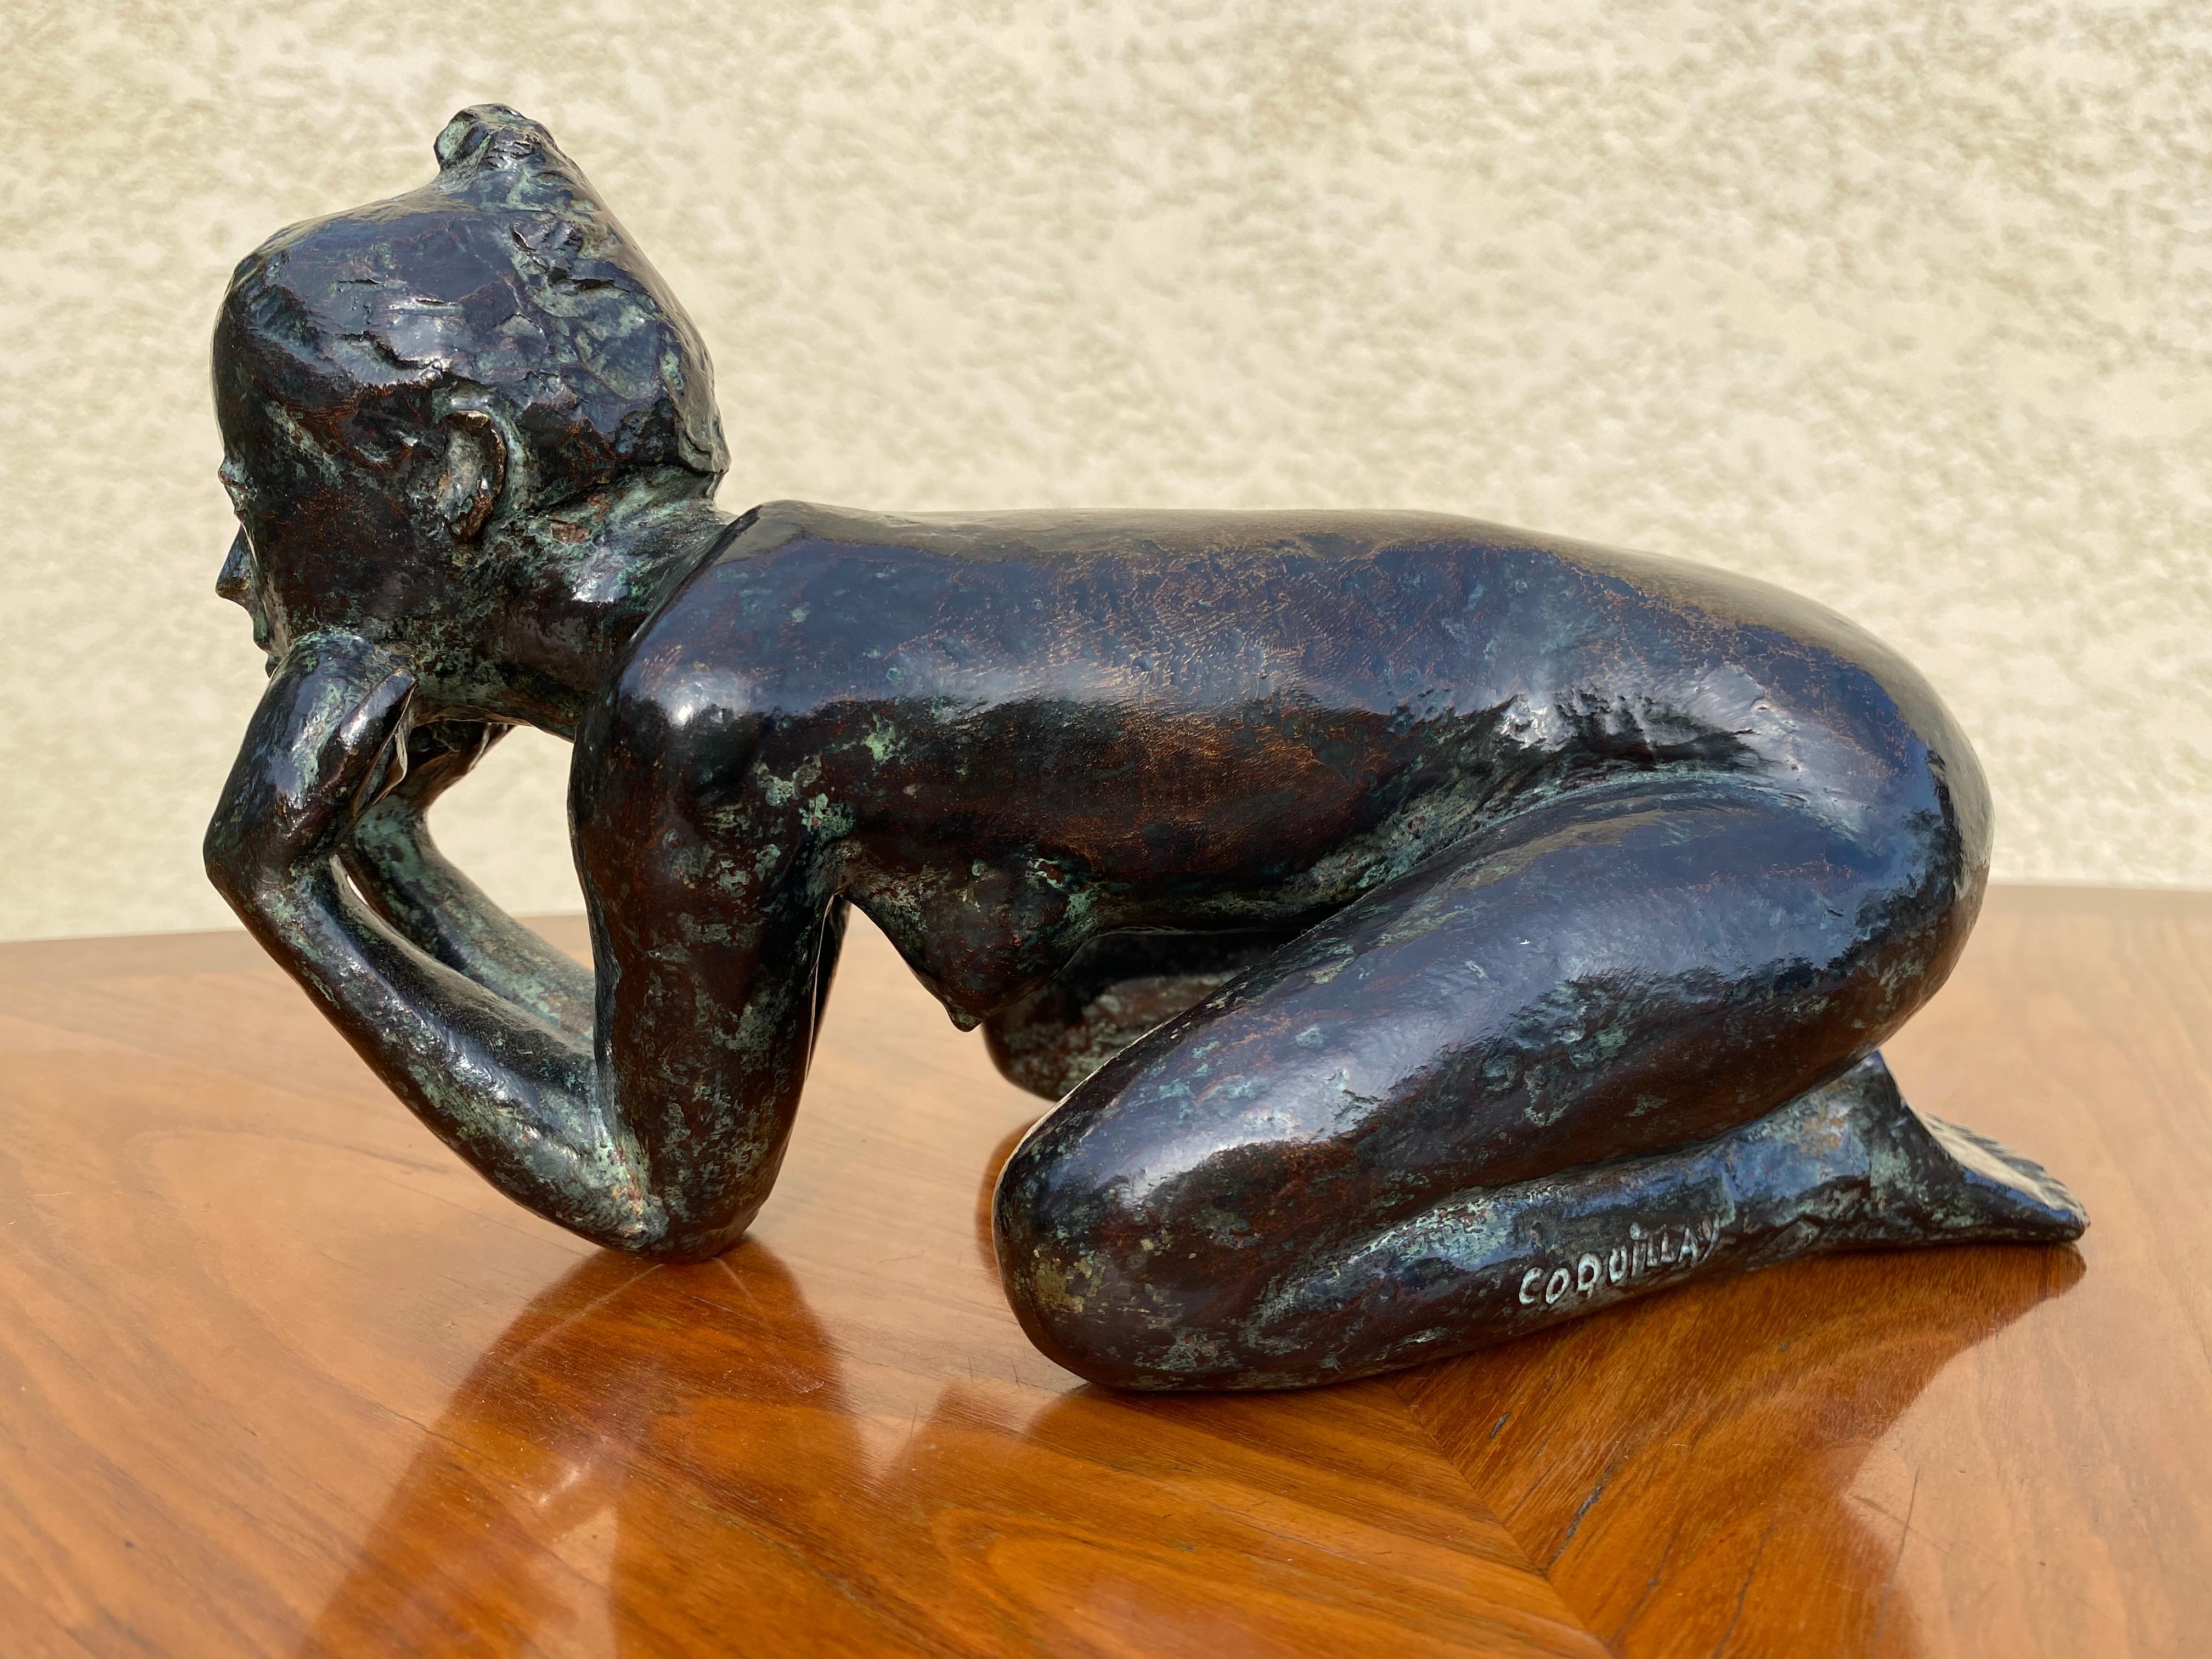 Bronze by Jacques Coquillay representing a naked young woman kneeling and leaning on her elbows with her head resting on her hands. Limited edition 7/8.
Artist - Jacques Coquillay born in 1935, French sculptor.